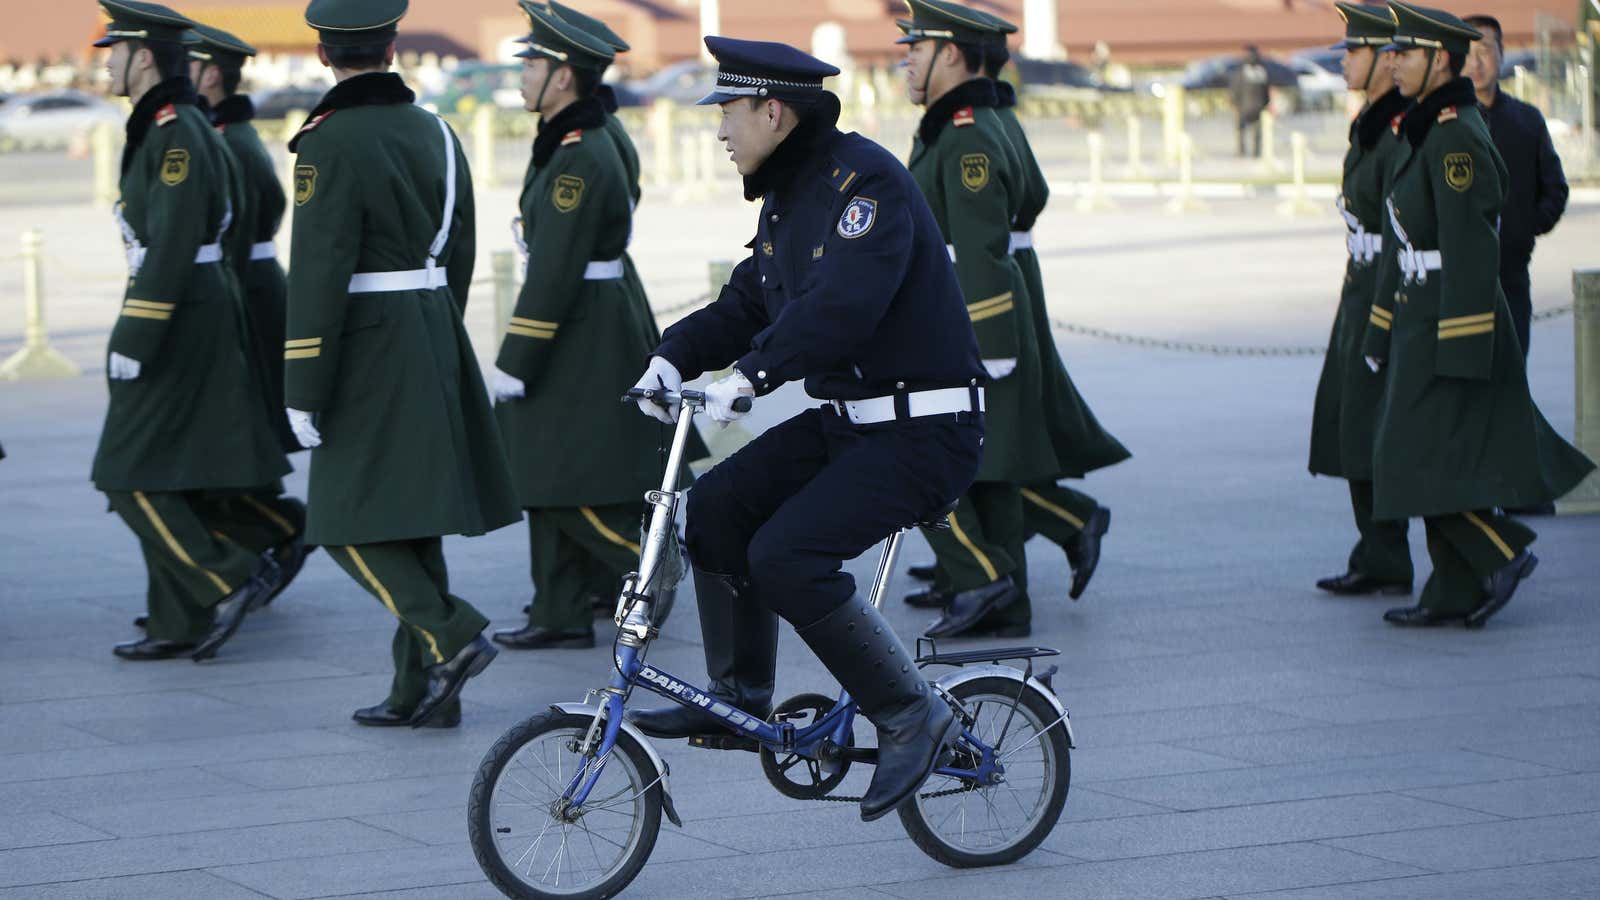 China’s police might finally get that upgrade this year.